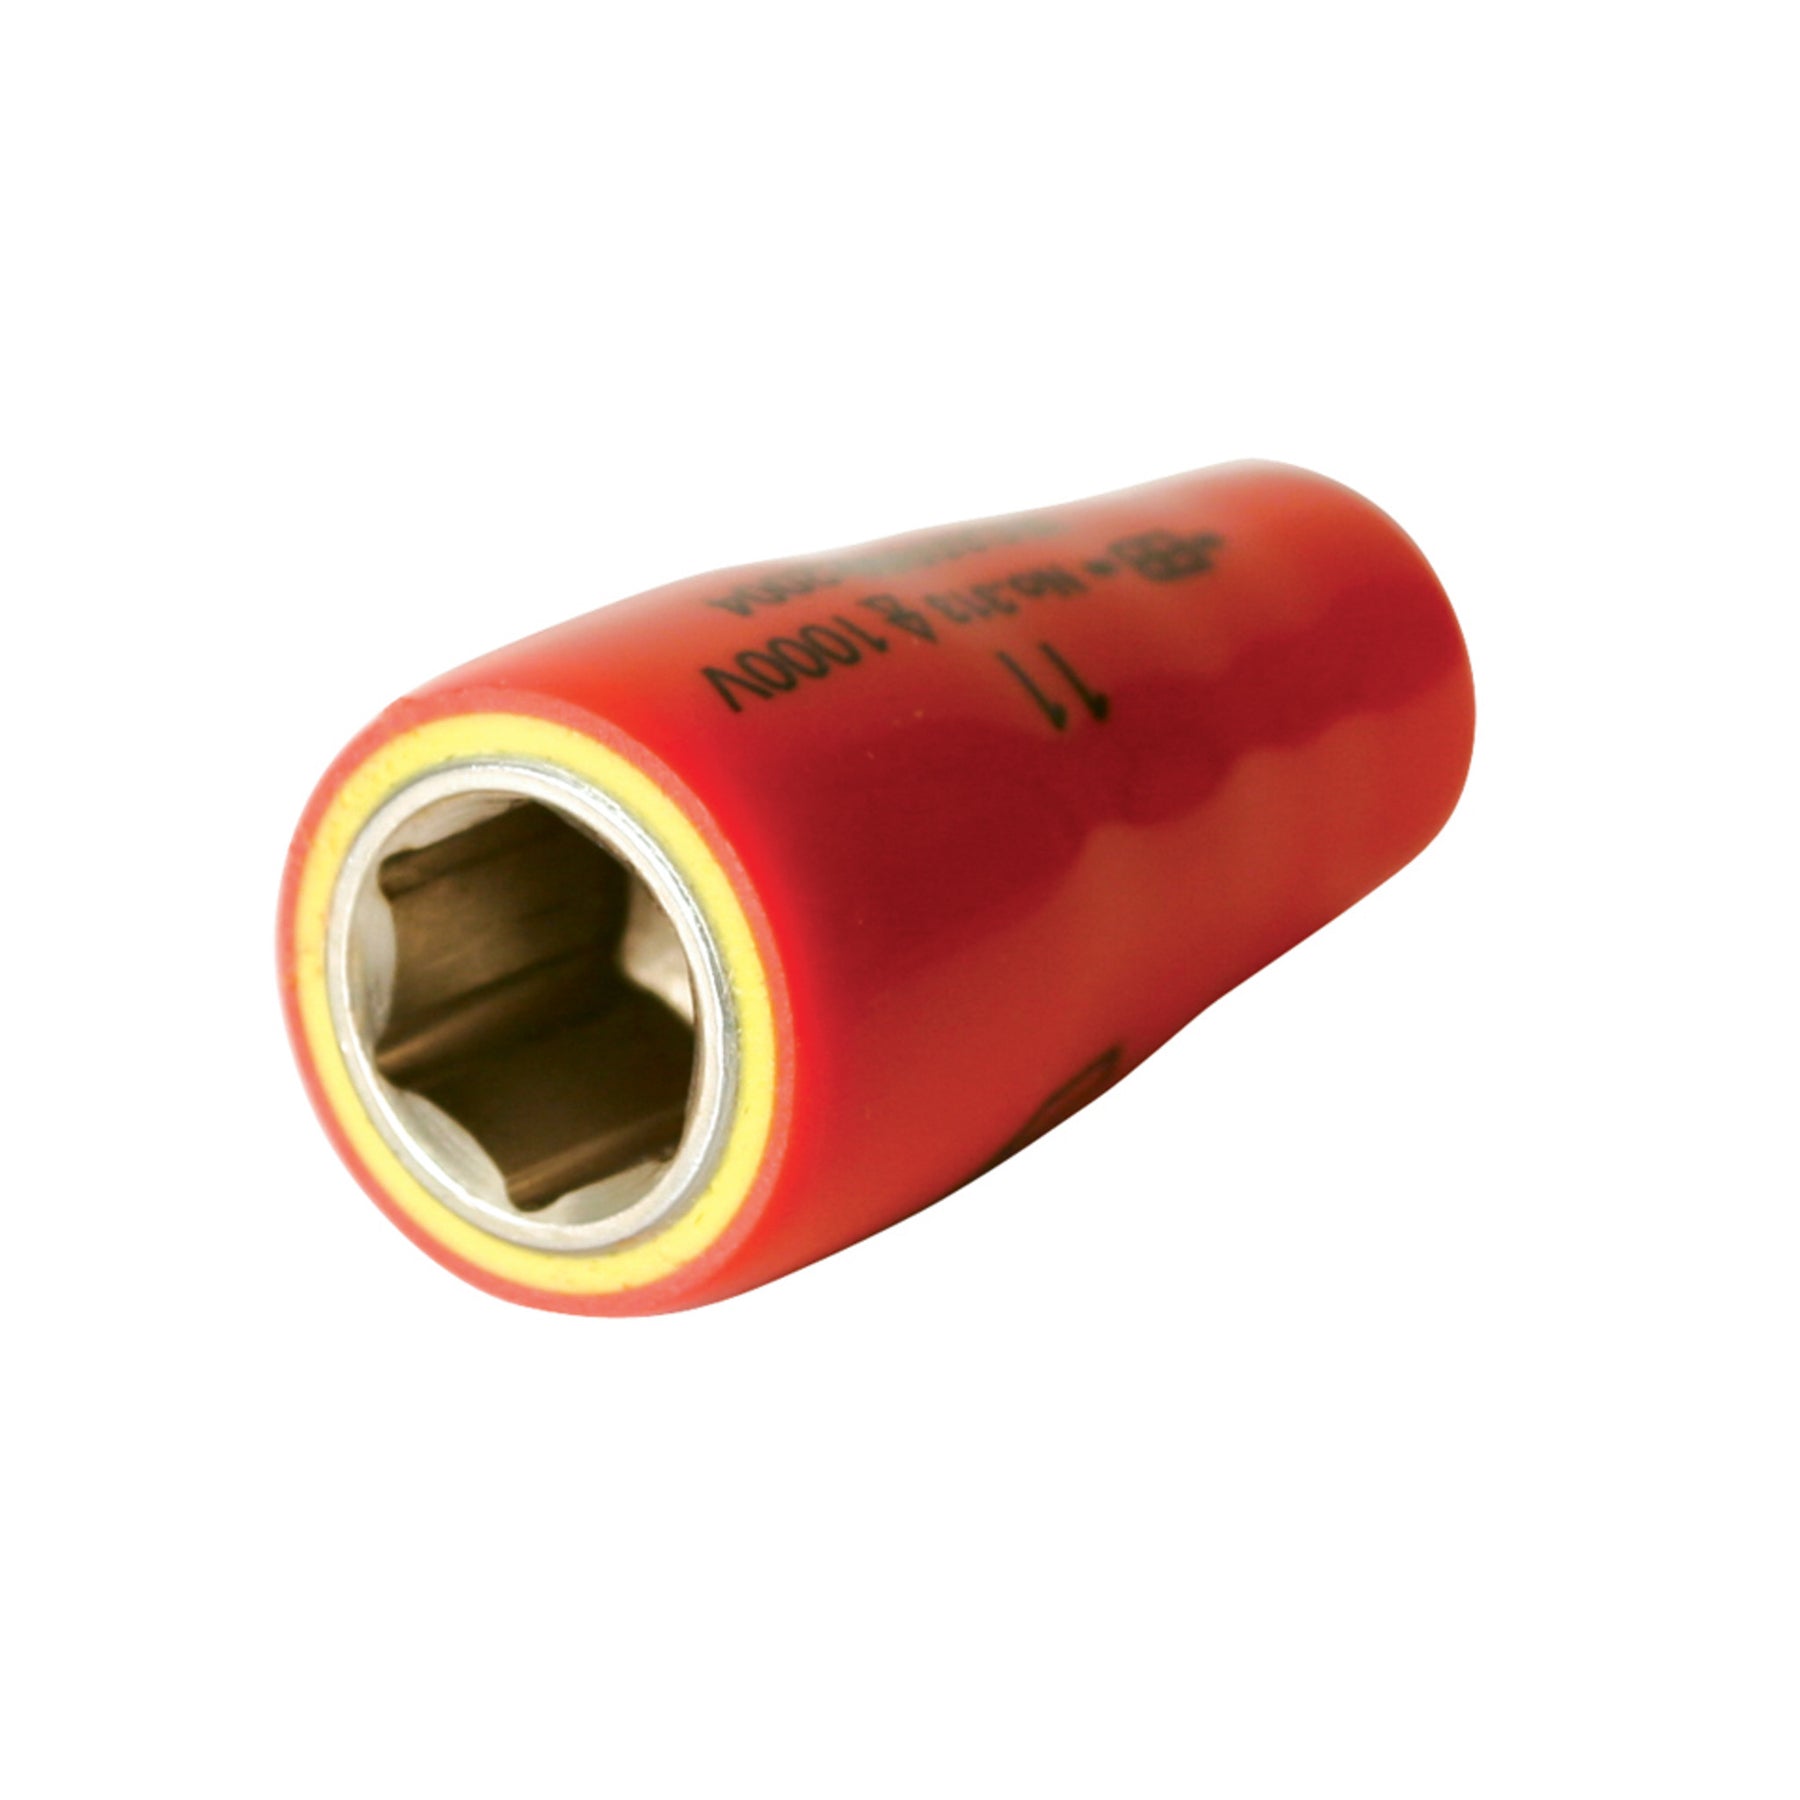 Insulated Socket 1/4" Drive 13mm